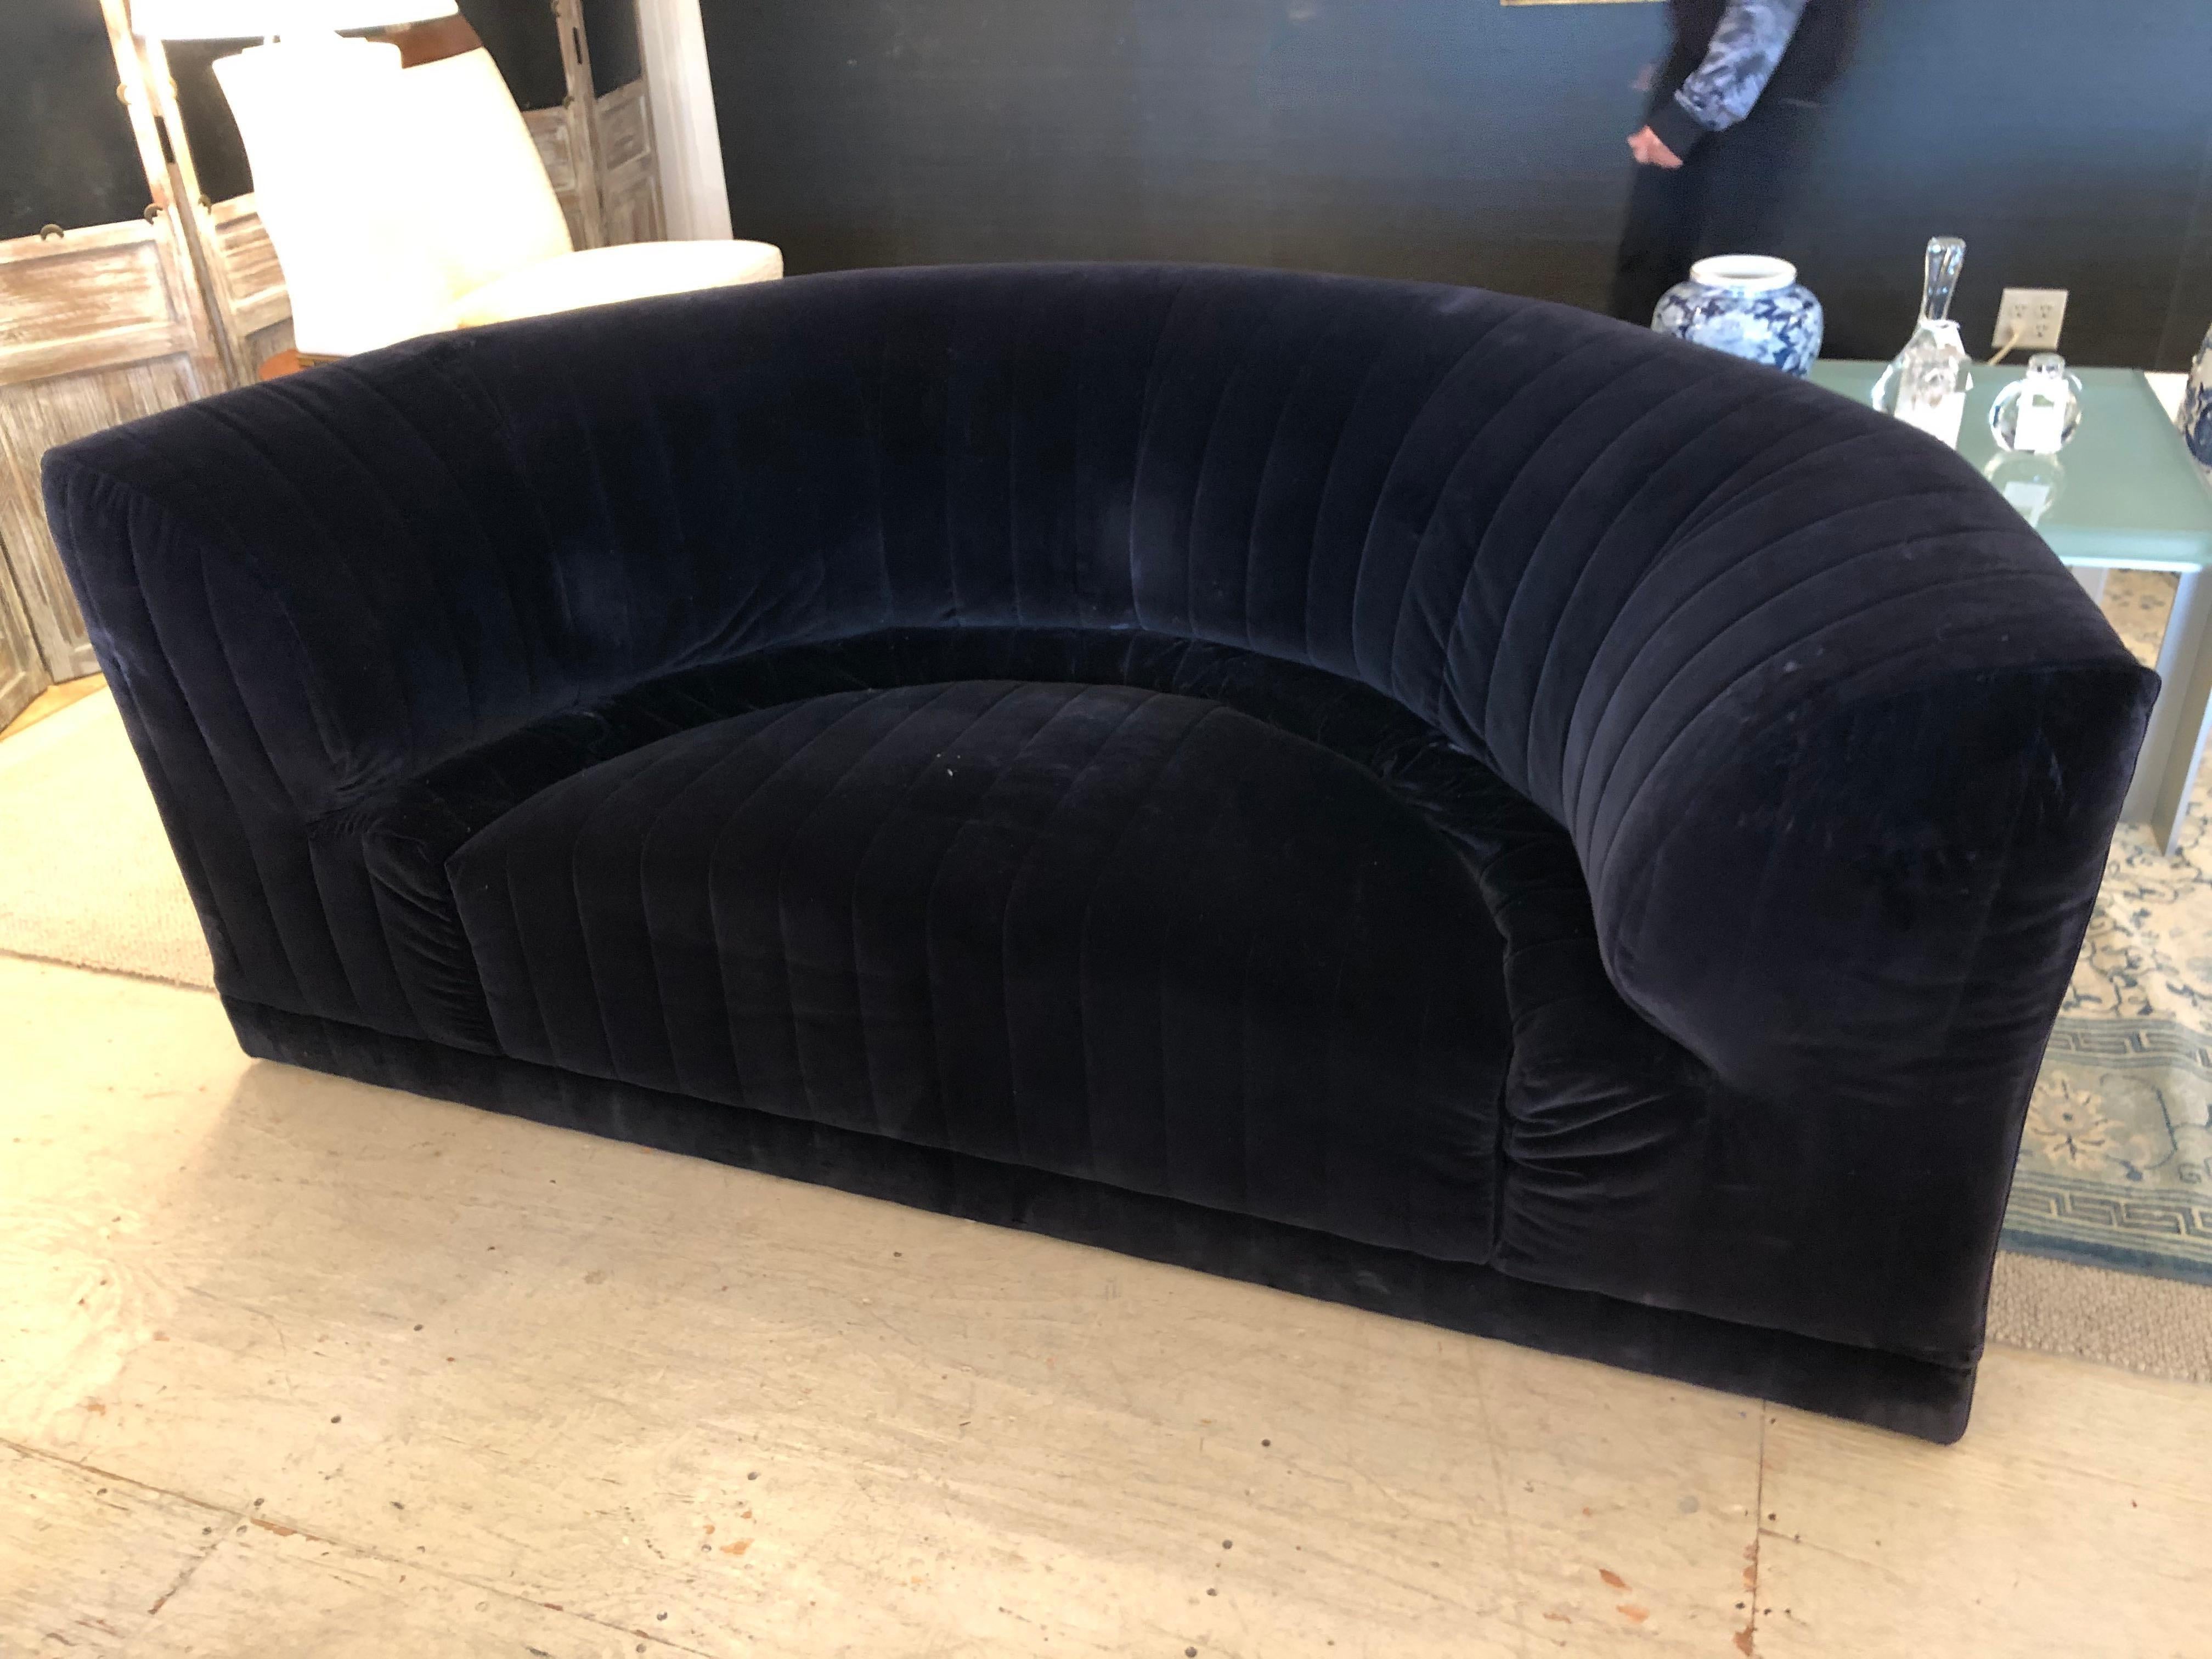 Elegant versatile size midnight blue velvet curvy loveseat by Roche Bobois. In the manner of De Sede, BB Italia, Mario Bellini, Camaleonda Sofa, and others. We also have the matching 8 piece sectional sofa available, but are selling the loveseat